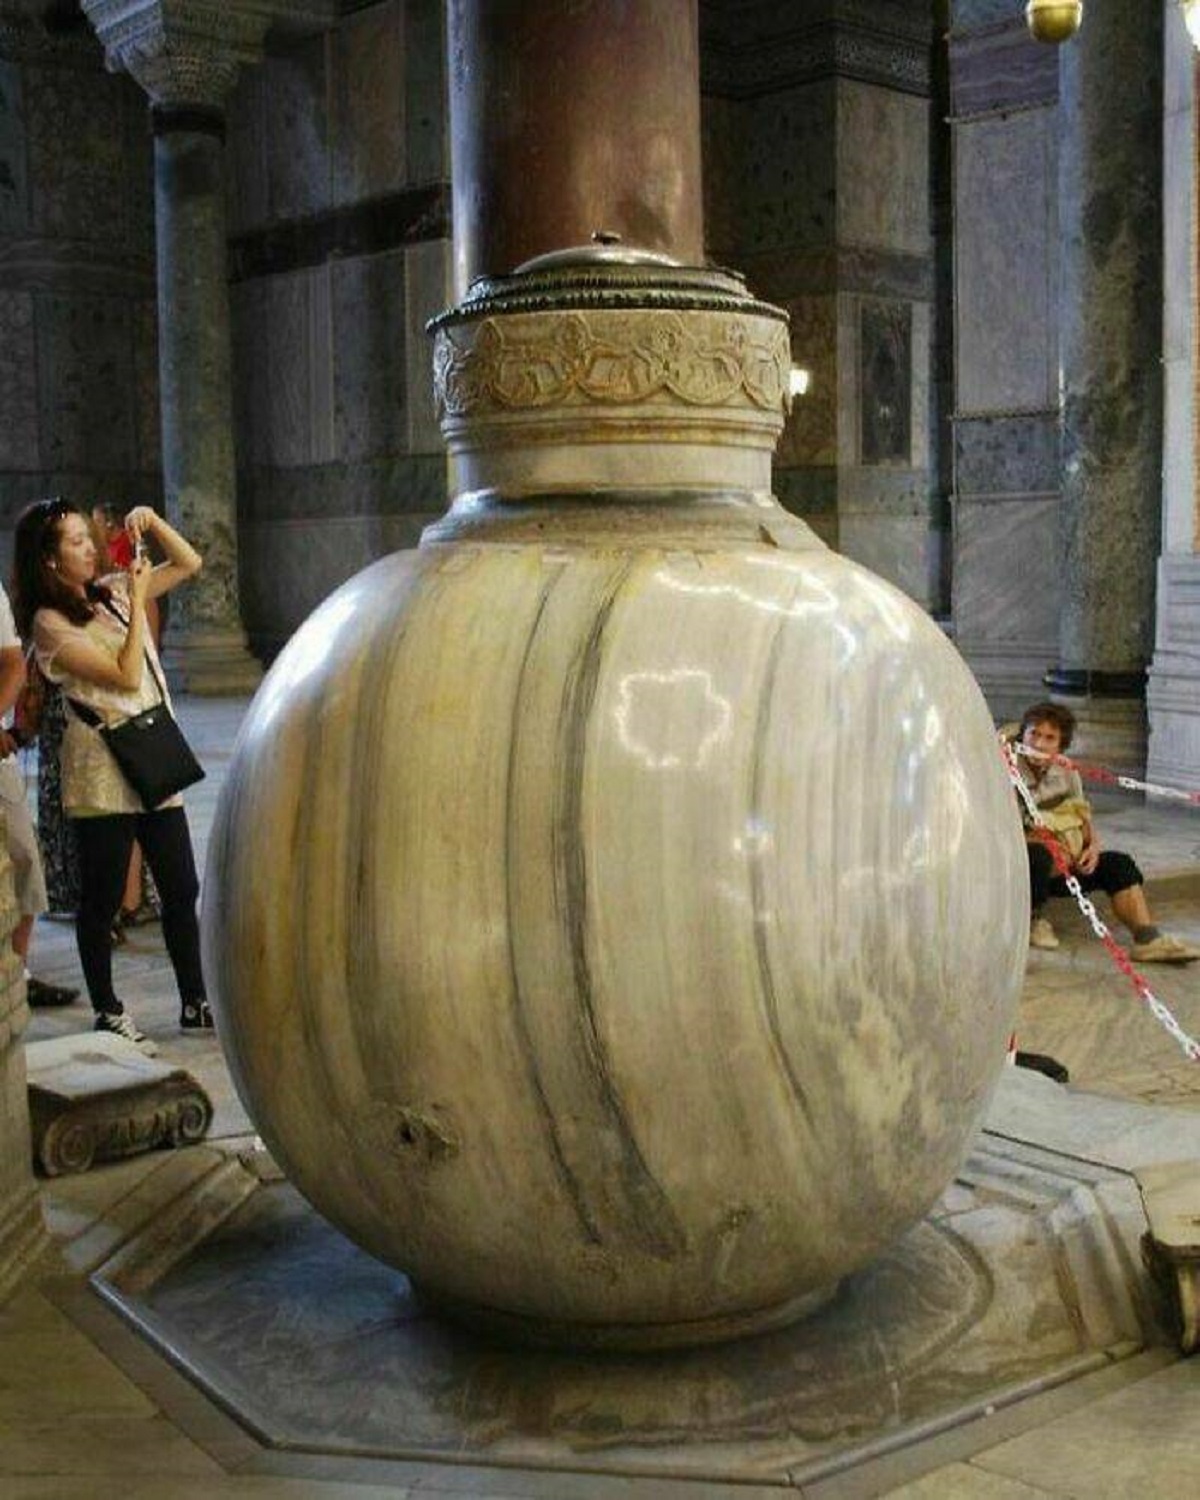 "One Of Two Huge Marble Lustration (Ritual Purification) Urns That Were Brought To The Hagia Sophia From Pergamon During The Reign Of The Ottoman Sultan Murad III"